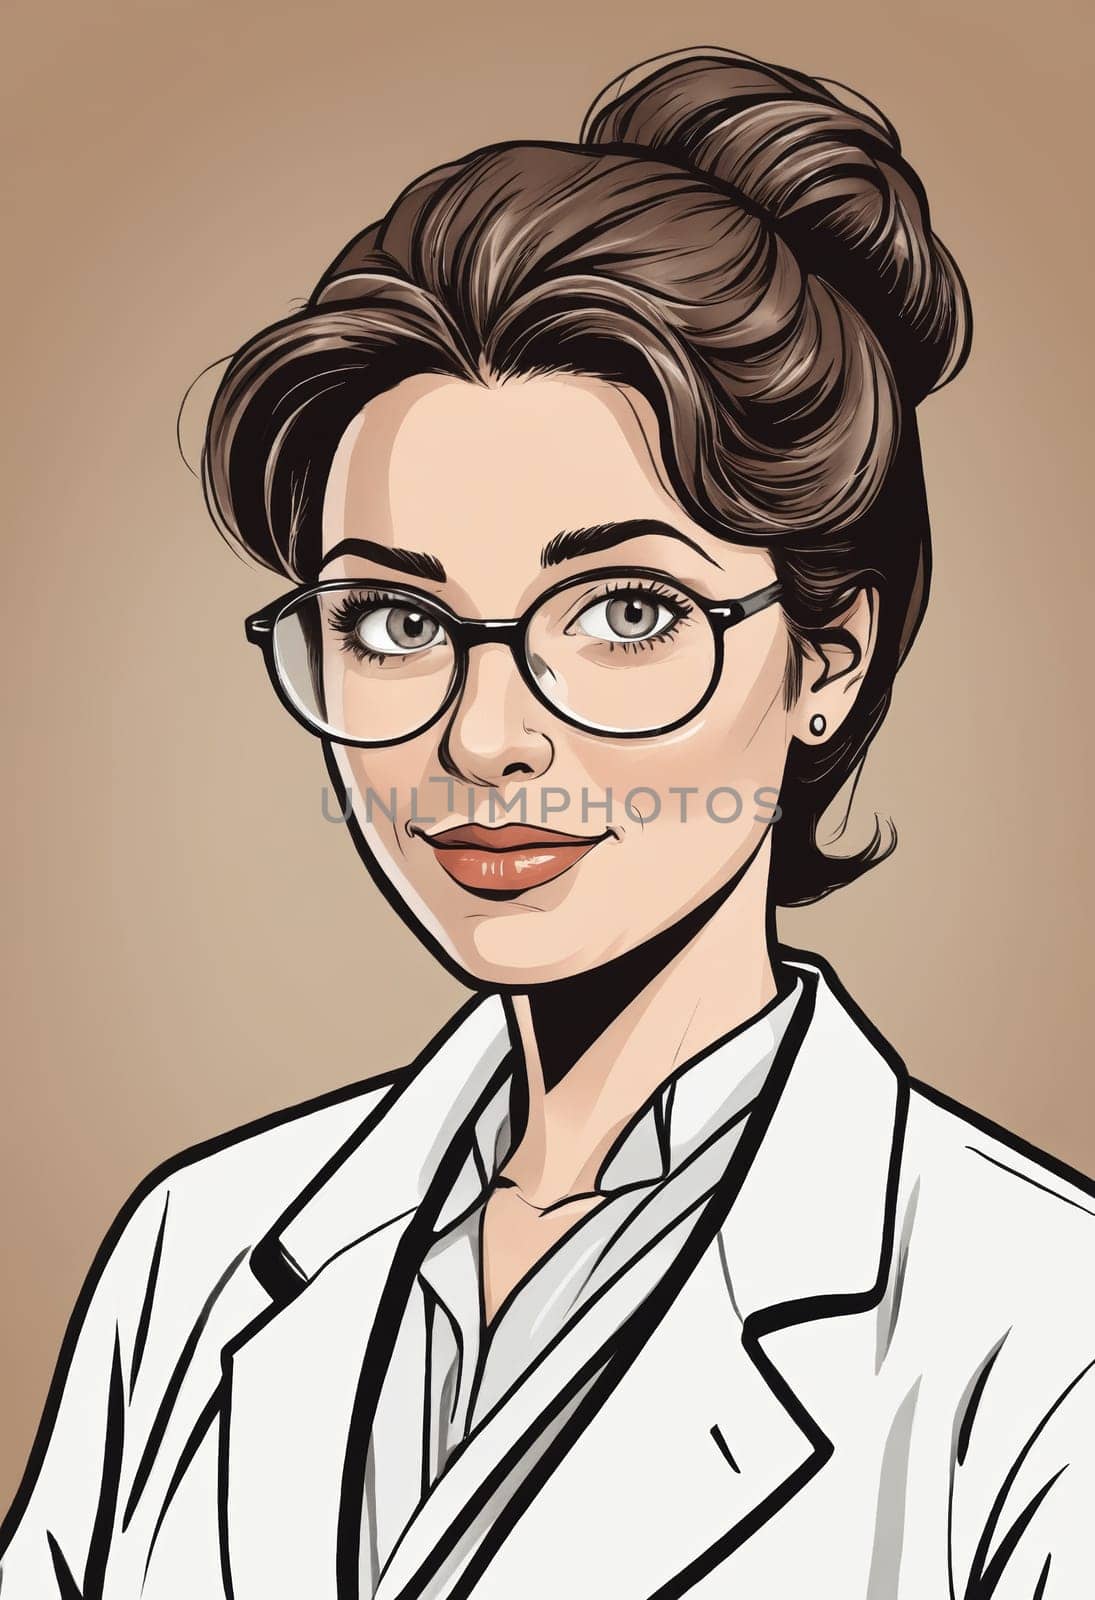 Professional Poise: Digital Portrait of a Person in White Coat by Andre1ns